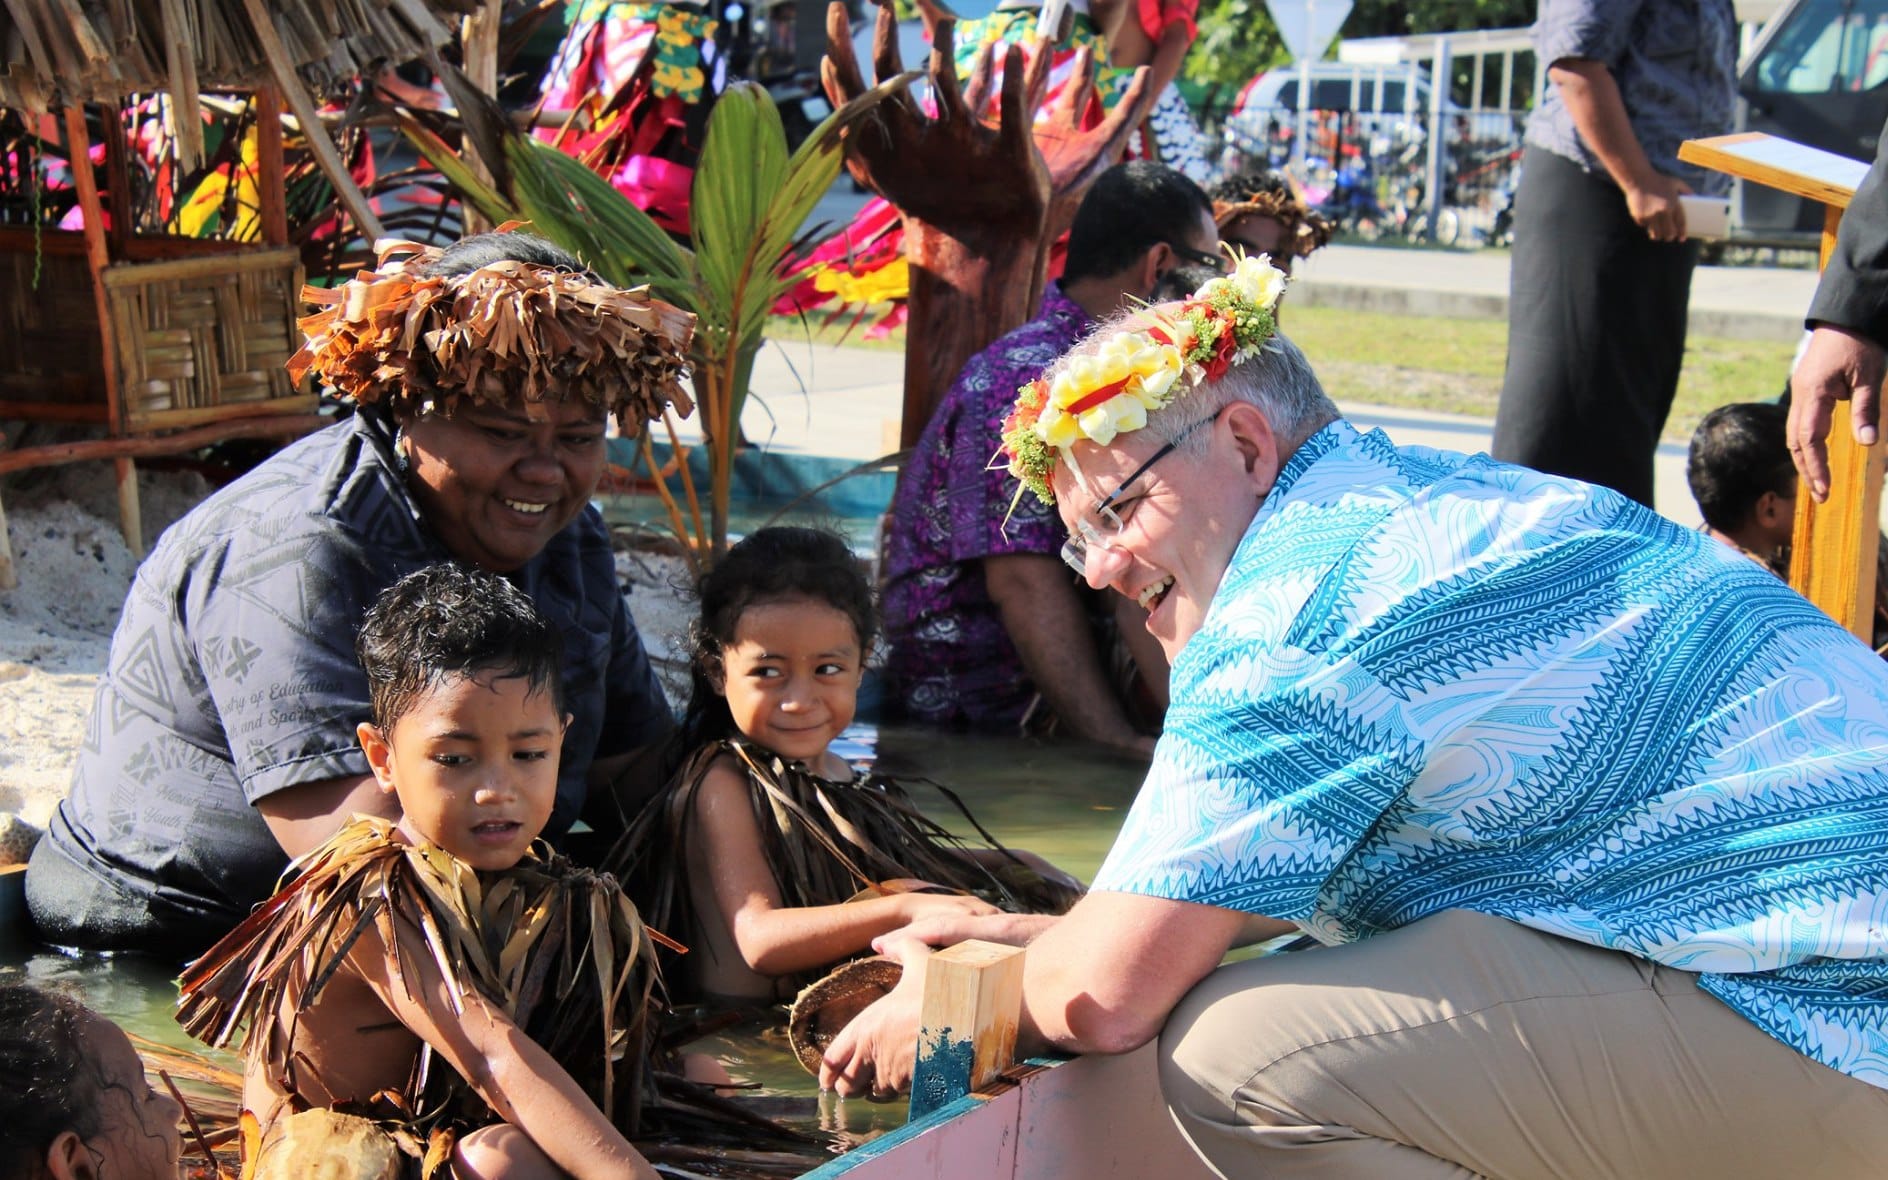 Australian prime minister Scott Morrison speaks to kids at a climate change display in Tuvalu ahead of the Pacific Islands Forum leaders summit on Funafuti. August 2019